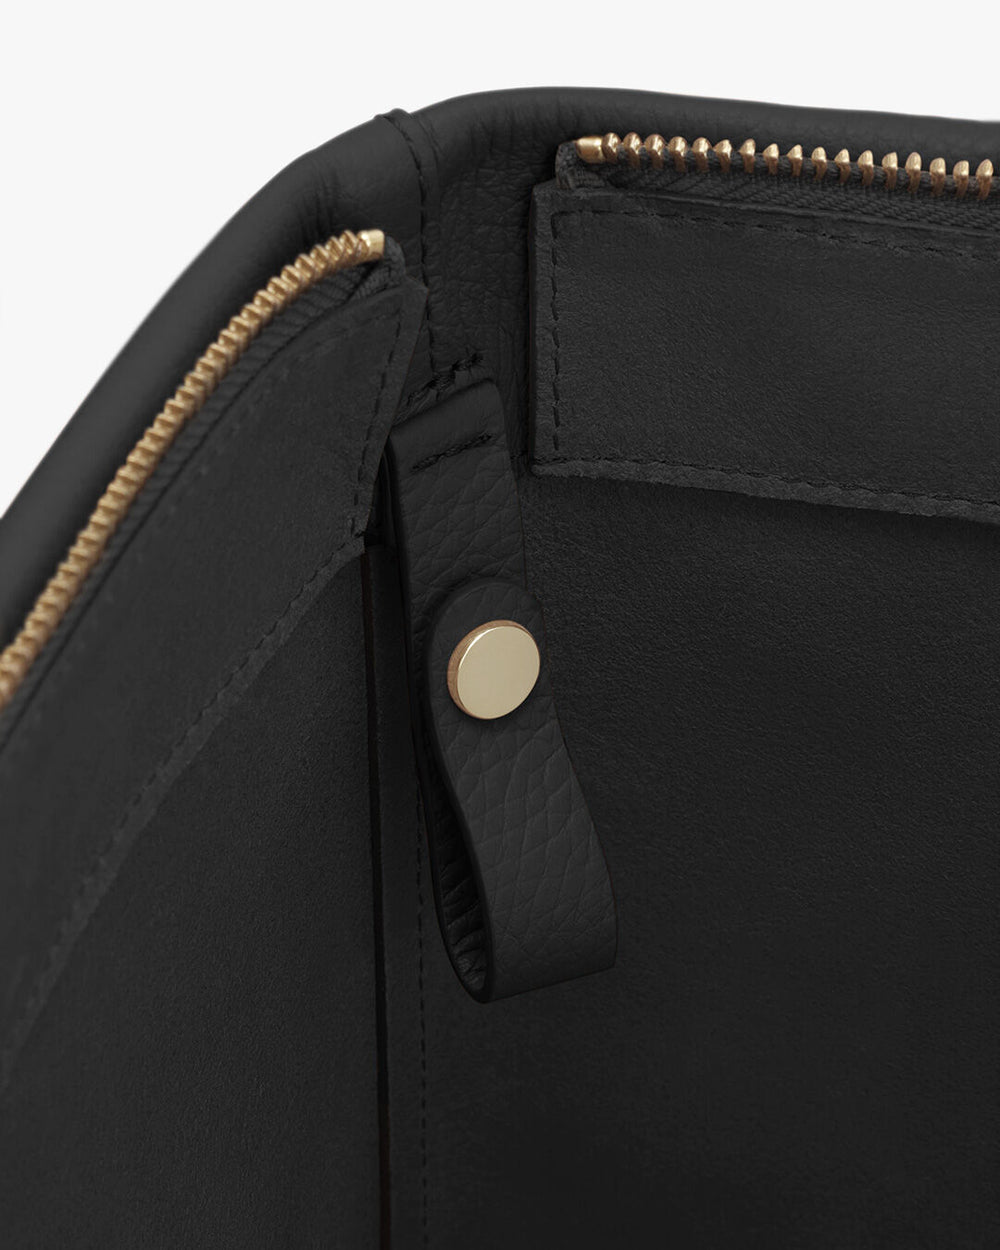 Close-up of a bag with a zipper and button detail.